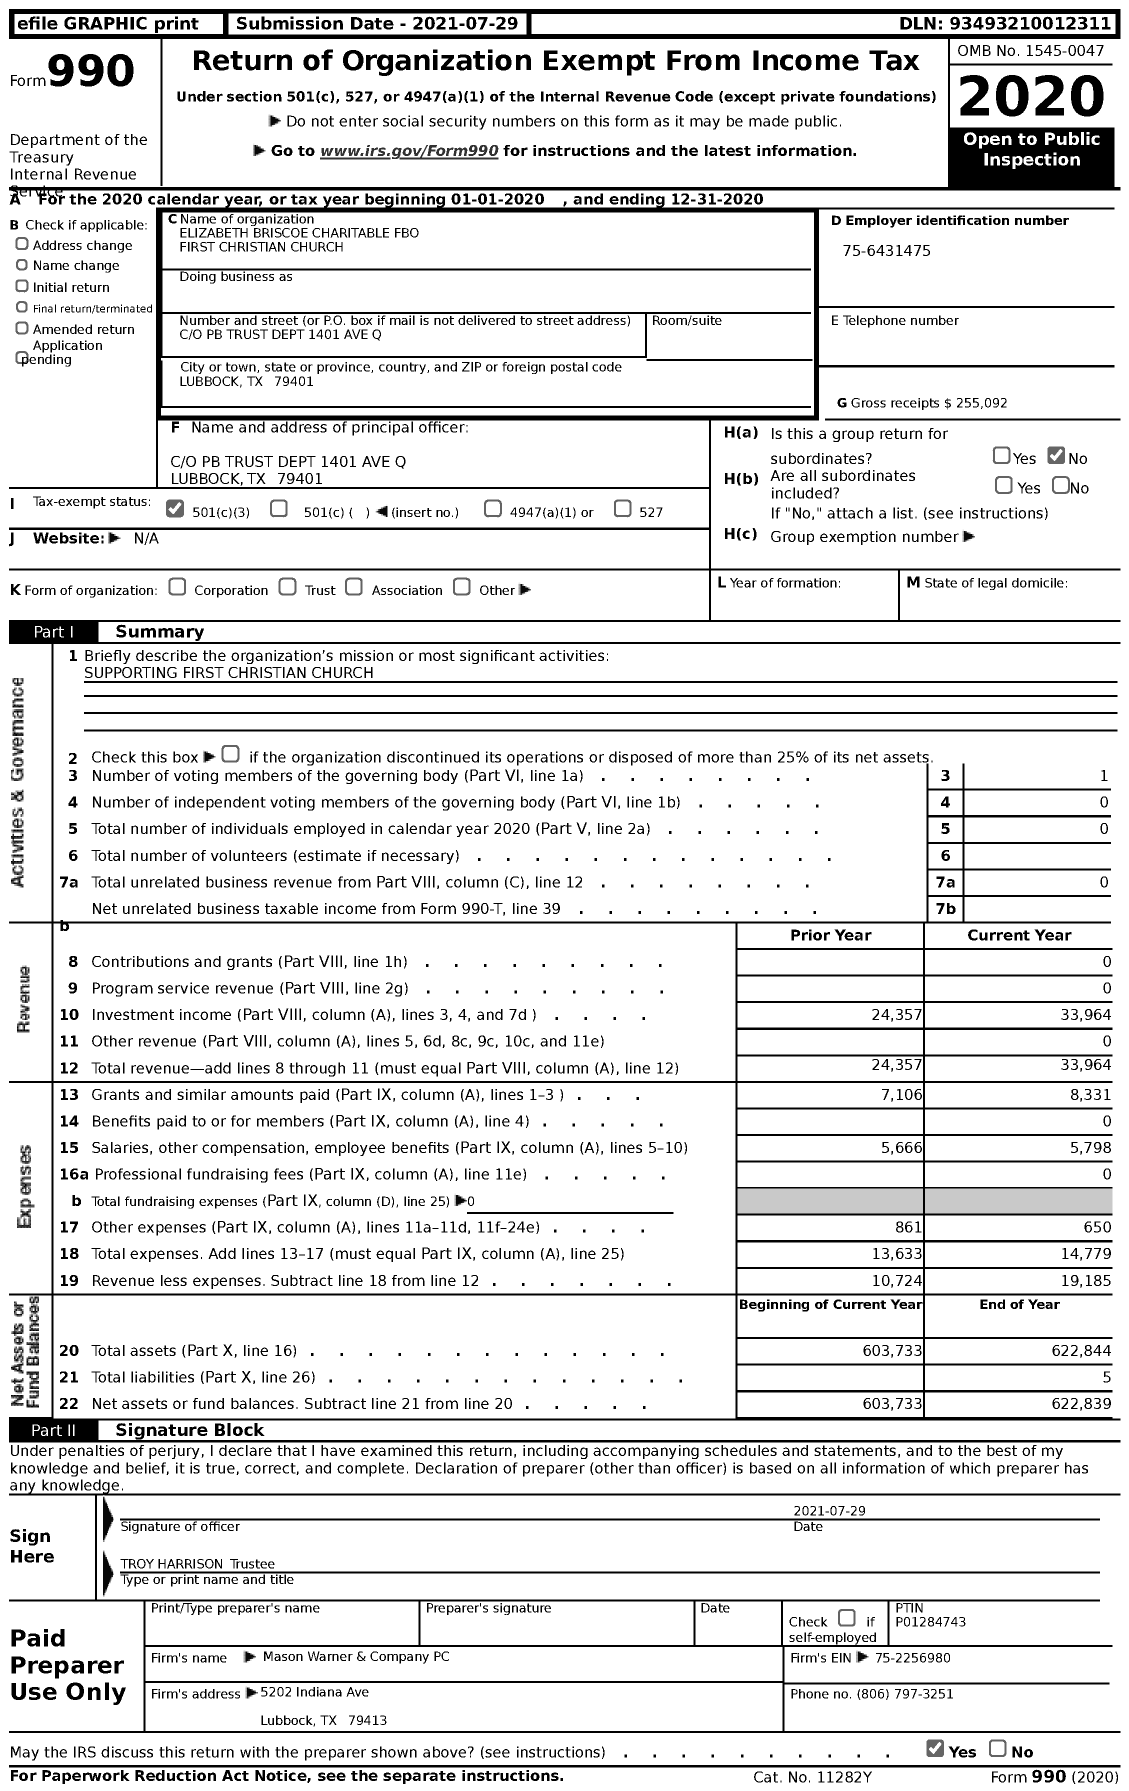 Image of first page of 2020 Form 990 for Elizabeth Briscoe Charitable Fbo First Christian Church